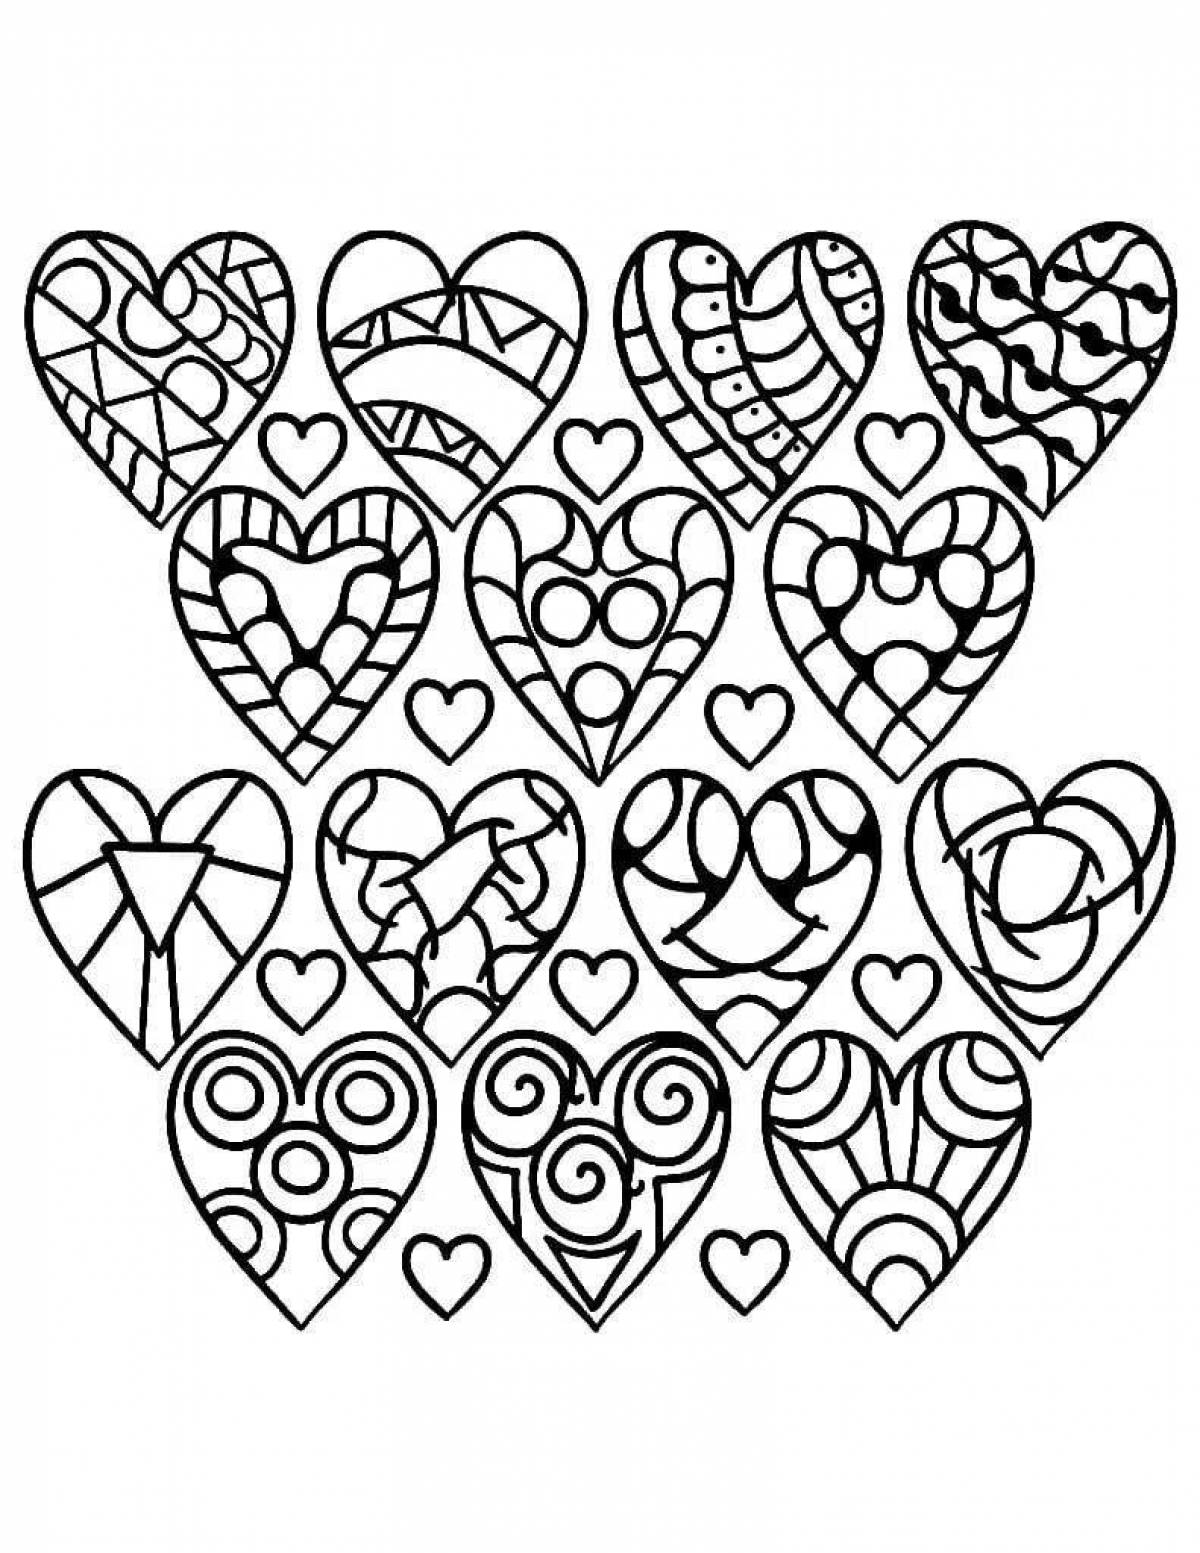 Exquisite heart coloring book